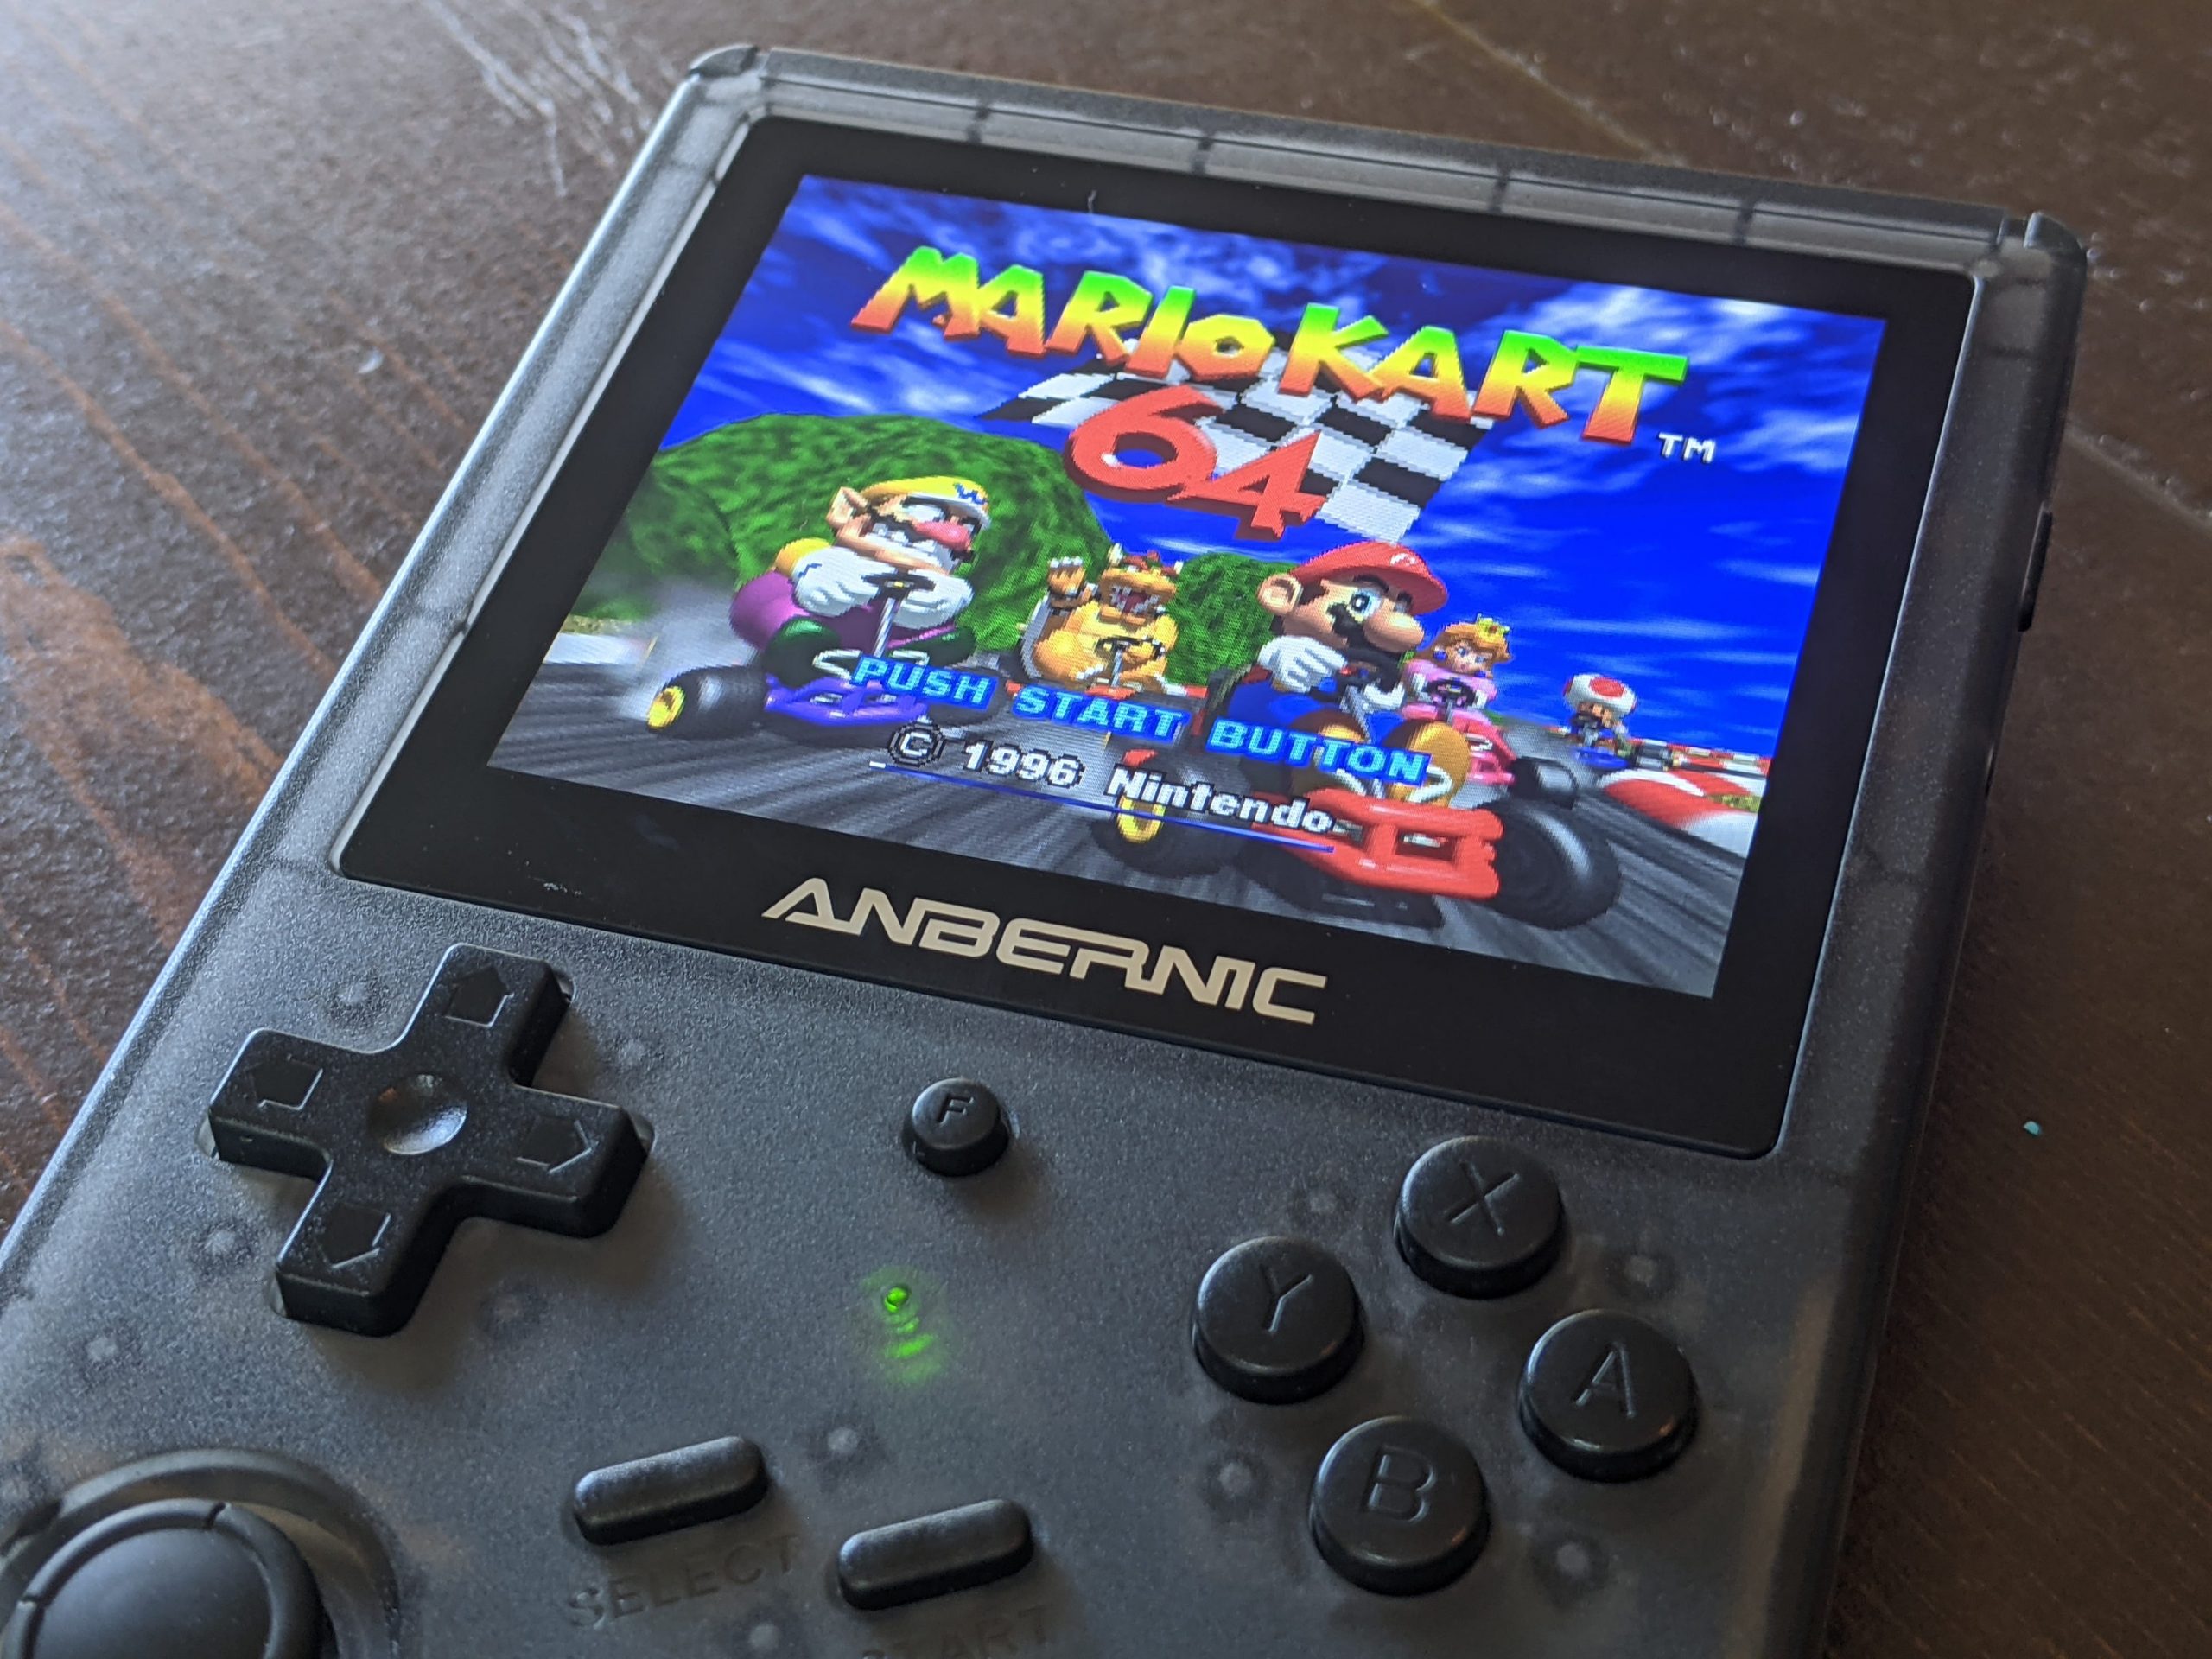 vergeven bruid zuur Amazon allows pirated Nintendo games to be sold through knockoff gaming  devices, including one that resembles the Game Boy